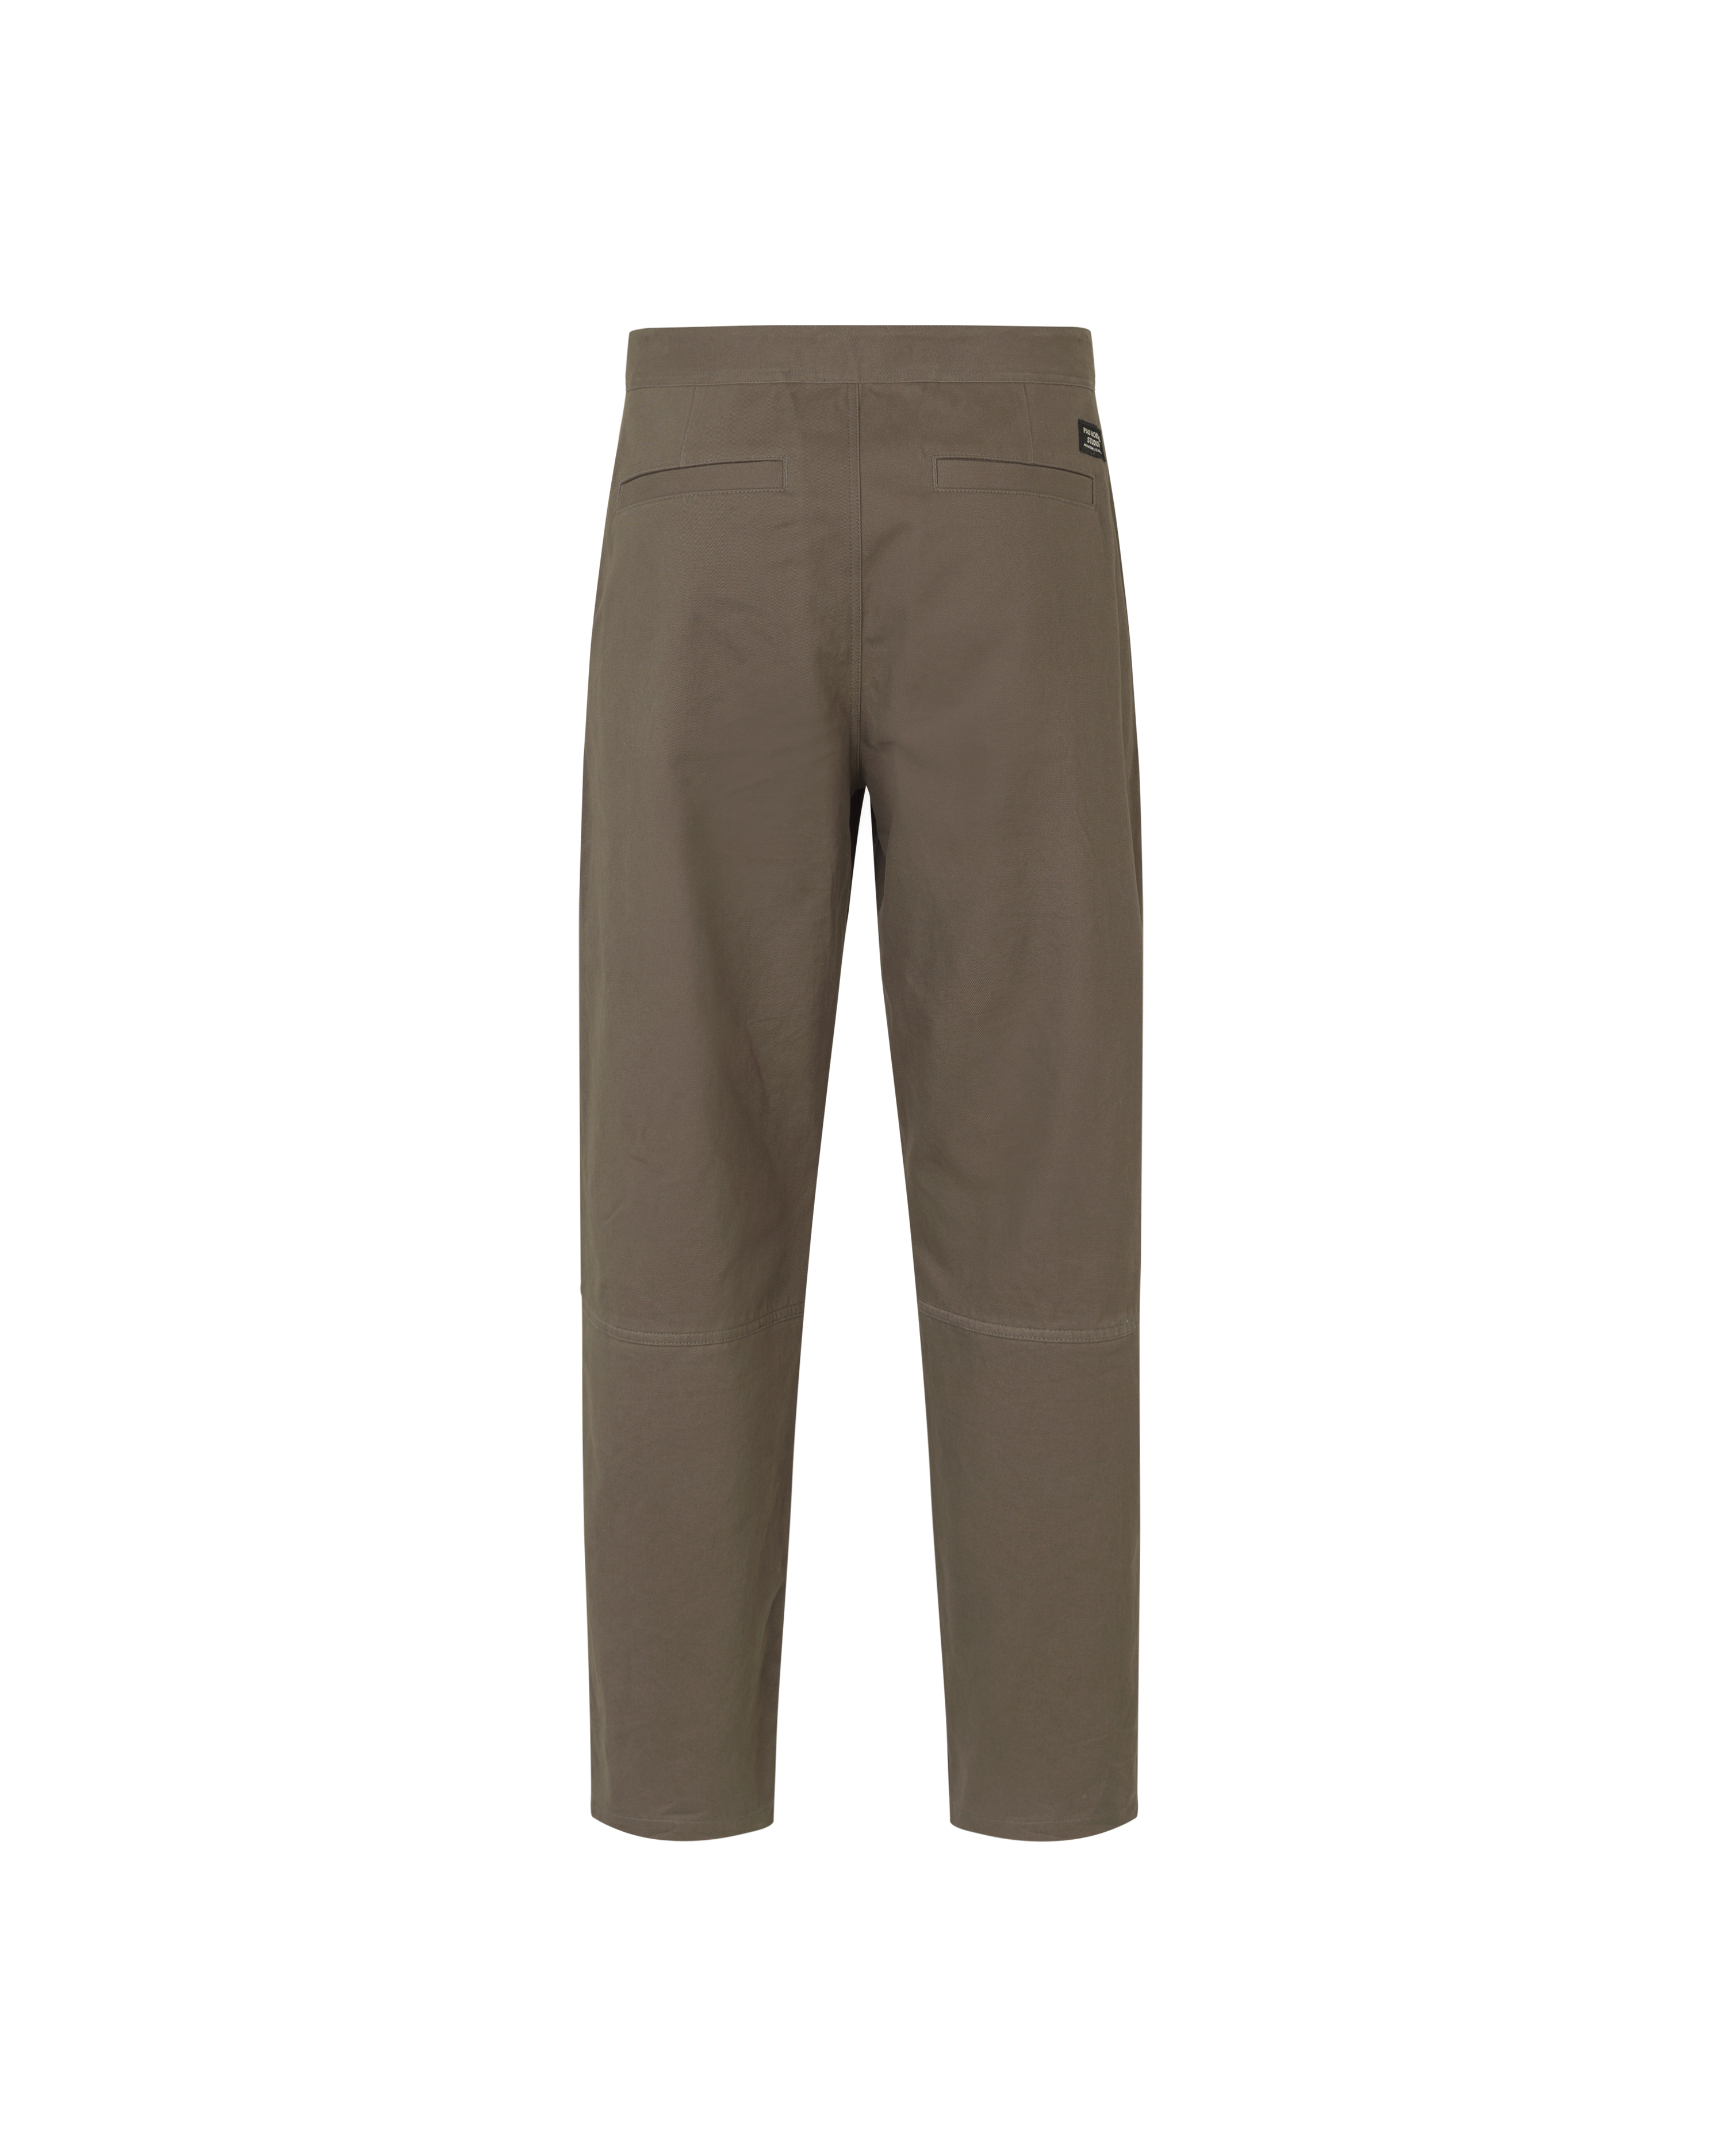 Off-Race Cotton Twill Pants - Ash Brown